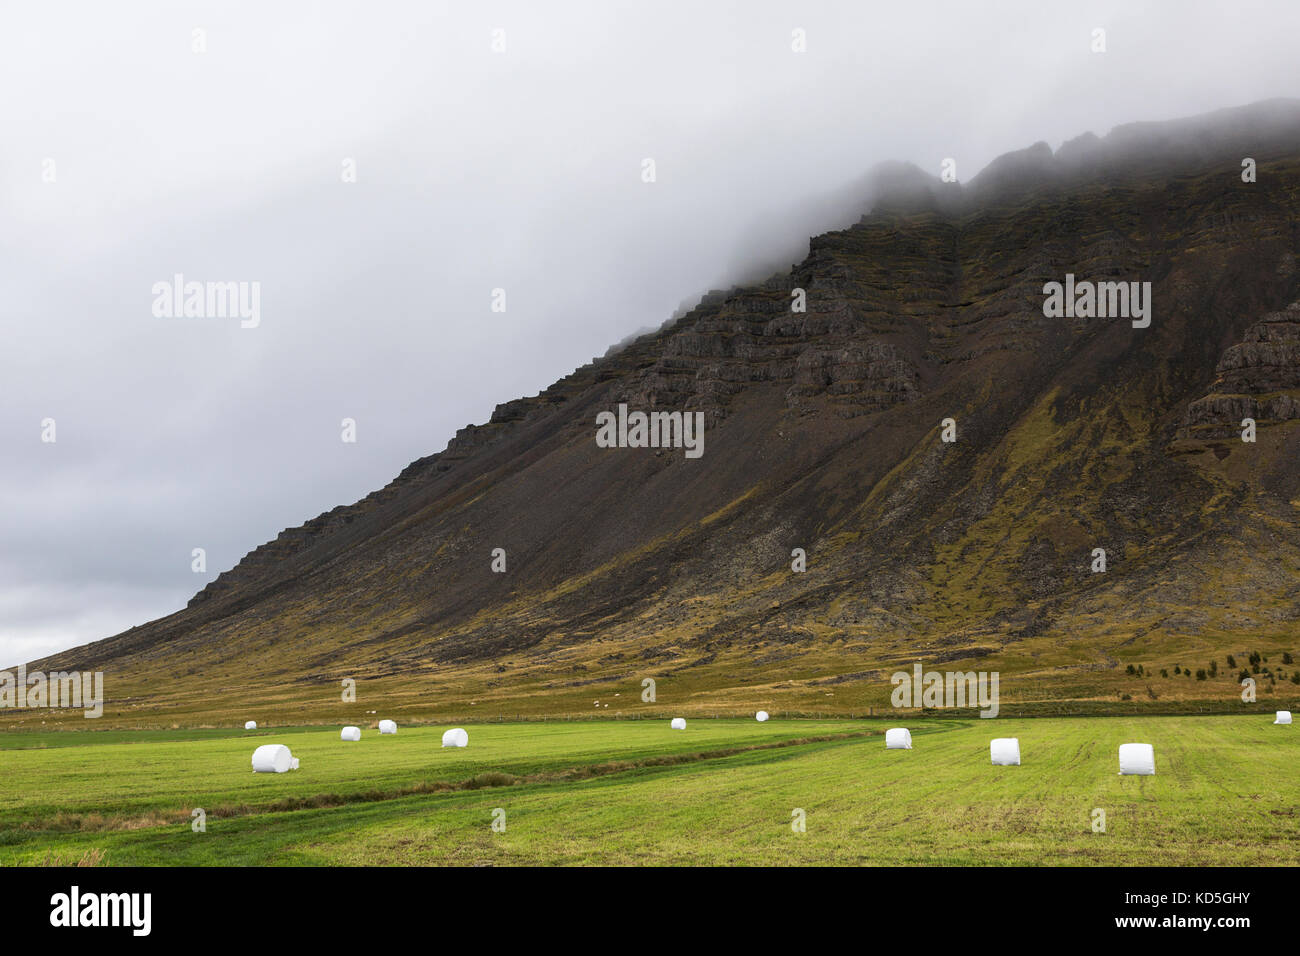 Icelandic landscape with field of bales and mountains, near Akranes, Iceland. Stock Photo